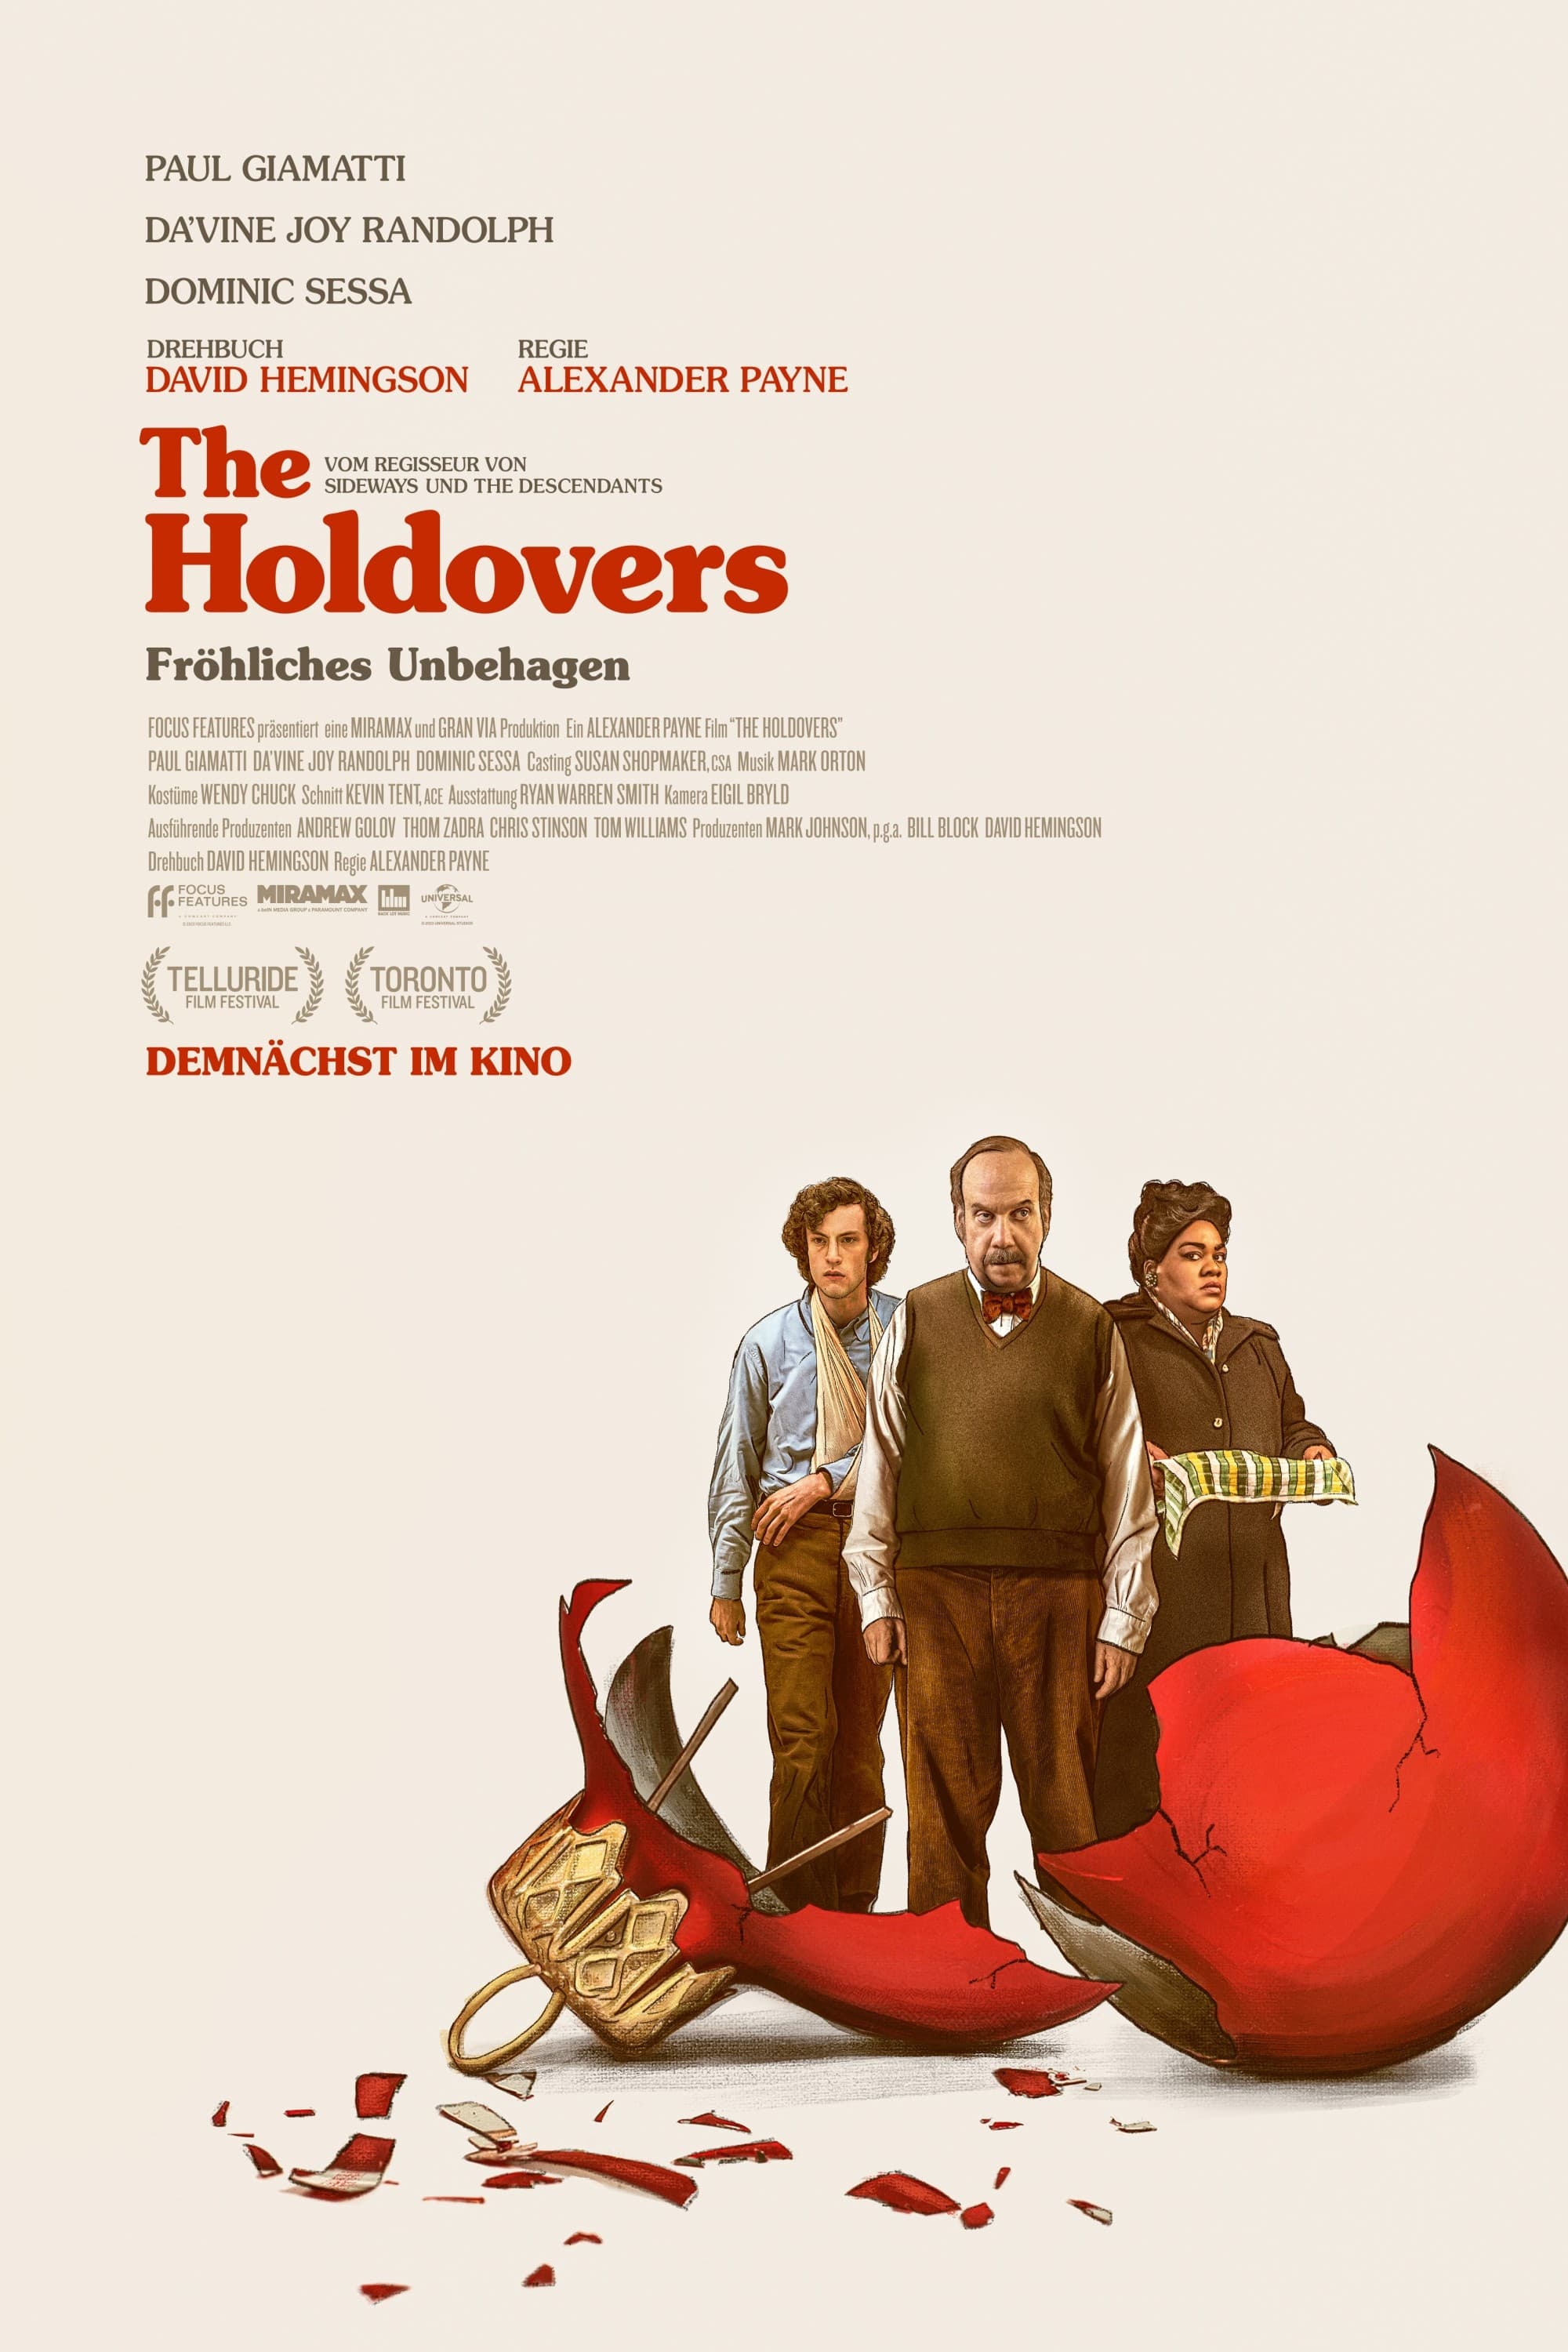 The Holdovers 2023 UHD UK BluRay 2160p HEVC DV HDR DTS DL Remux-TvR